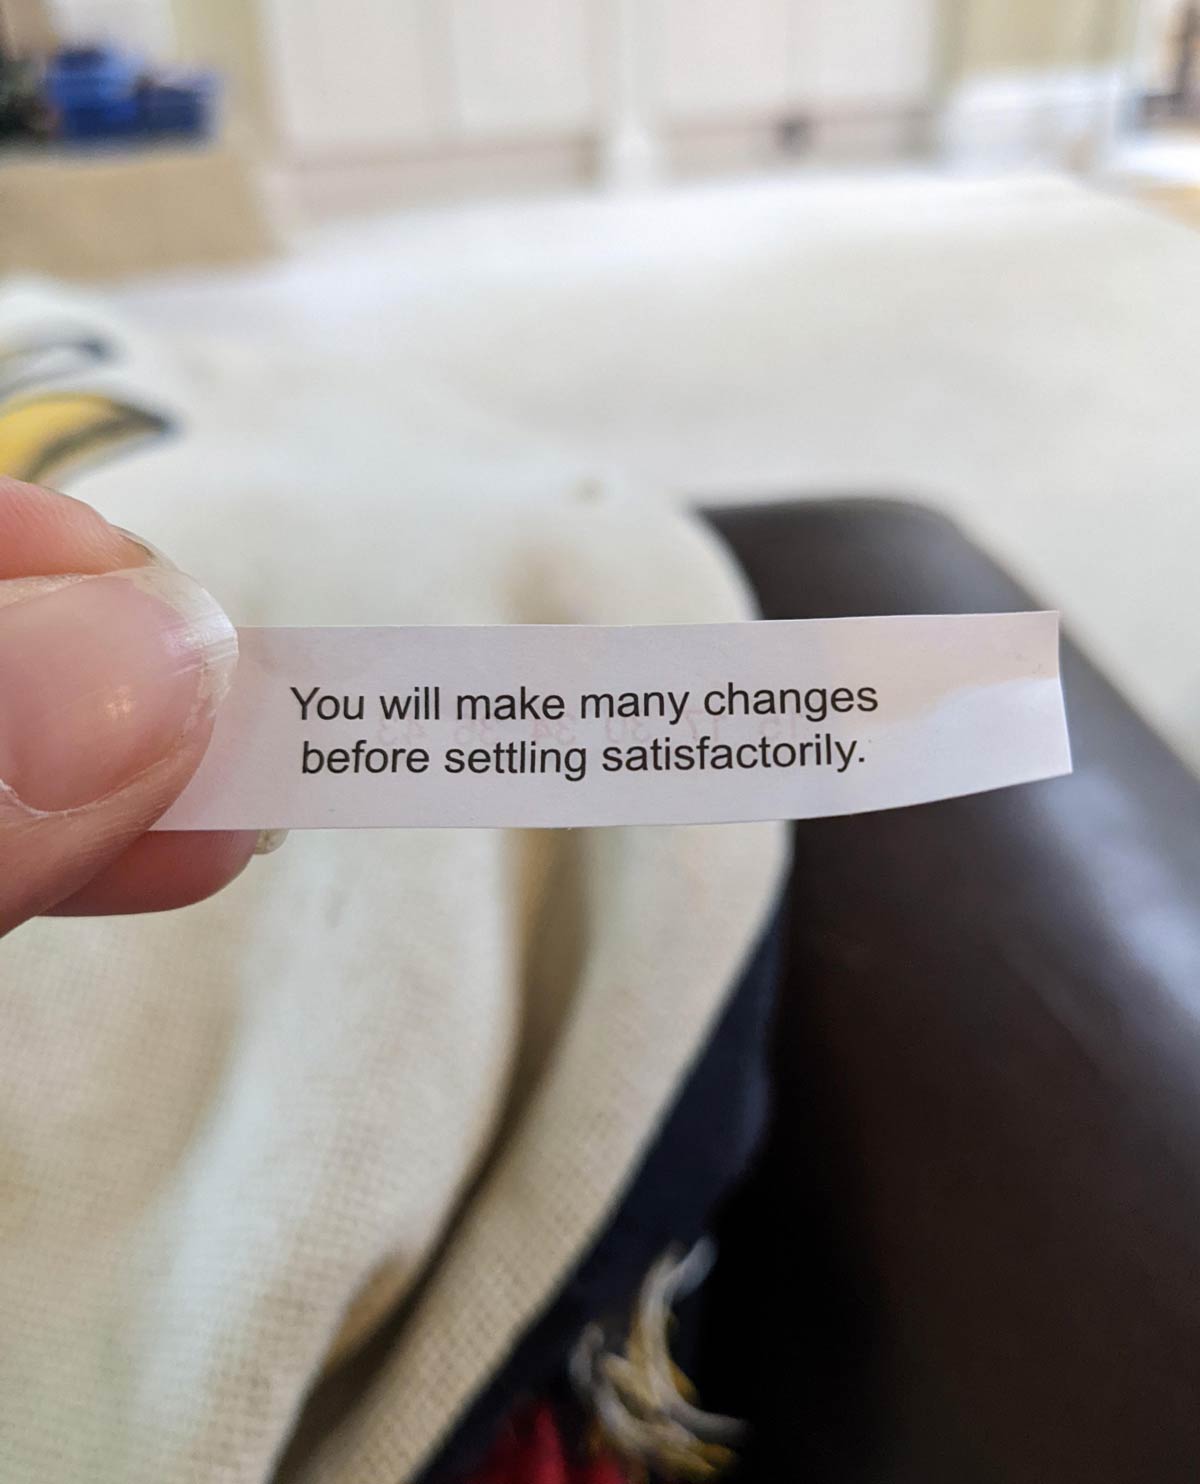 The fortune that came in my cookie from the valentine's meal my lovely man bought for us